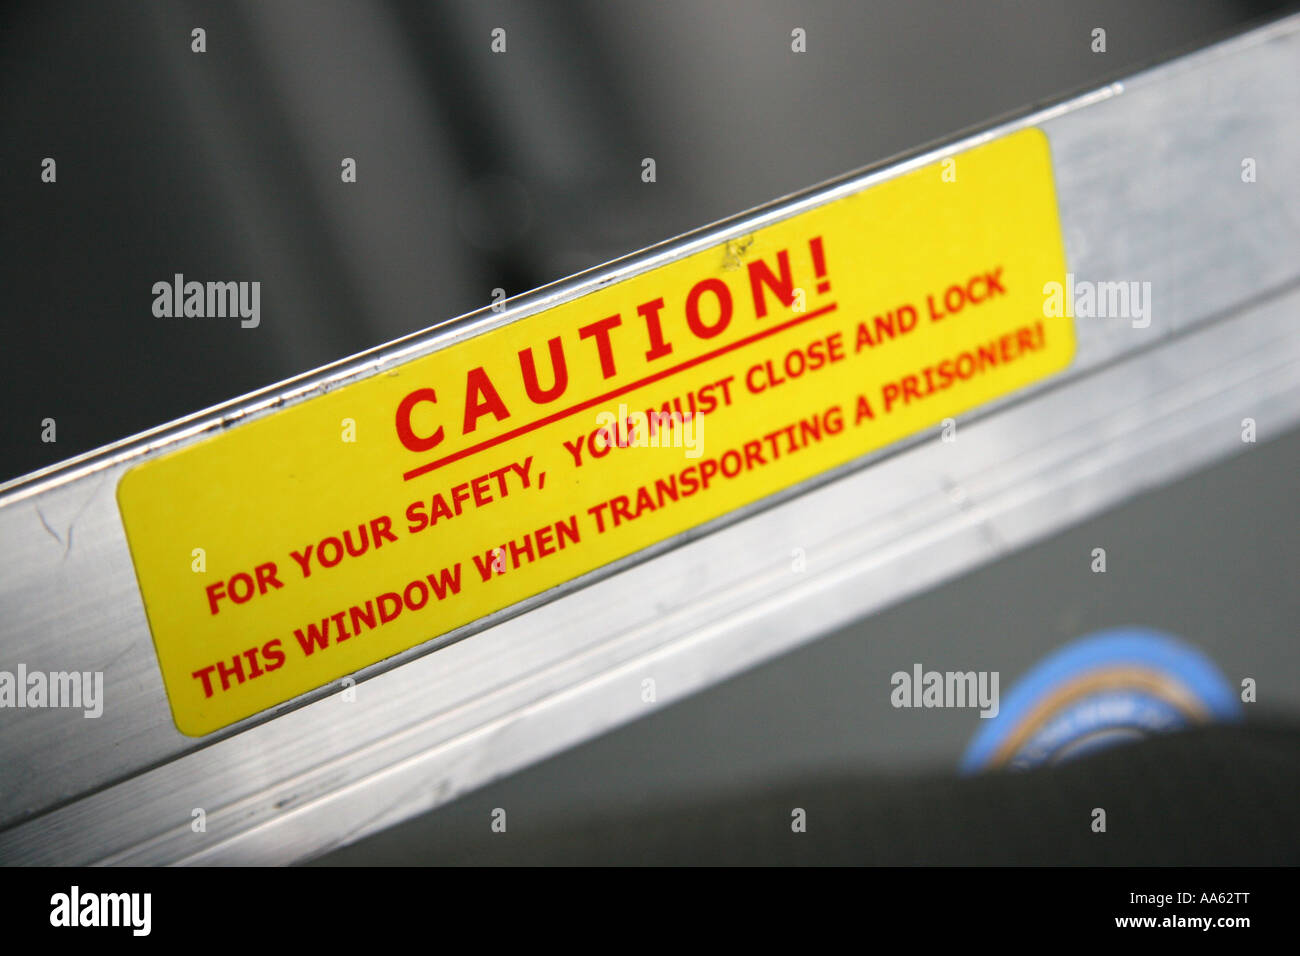 Caution sign about transporting prisoners in the rear of a police car Stock Photo